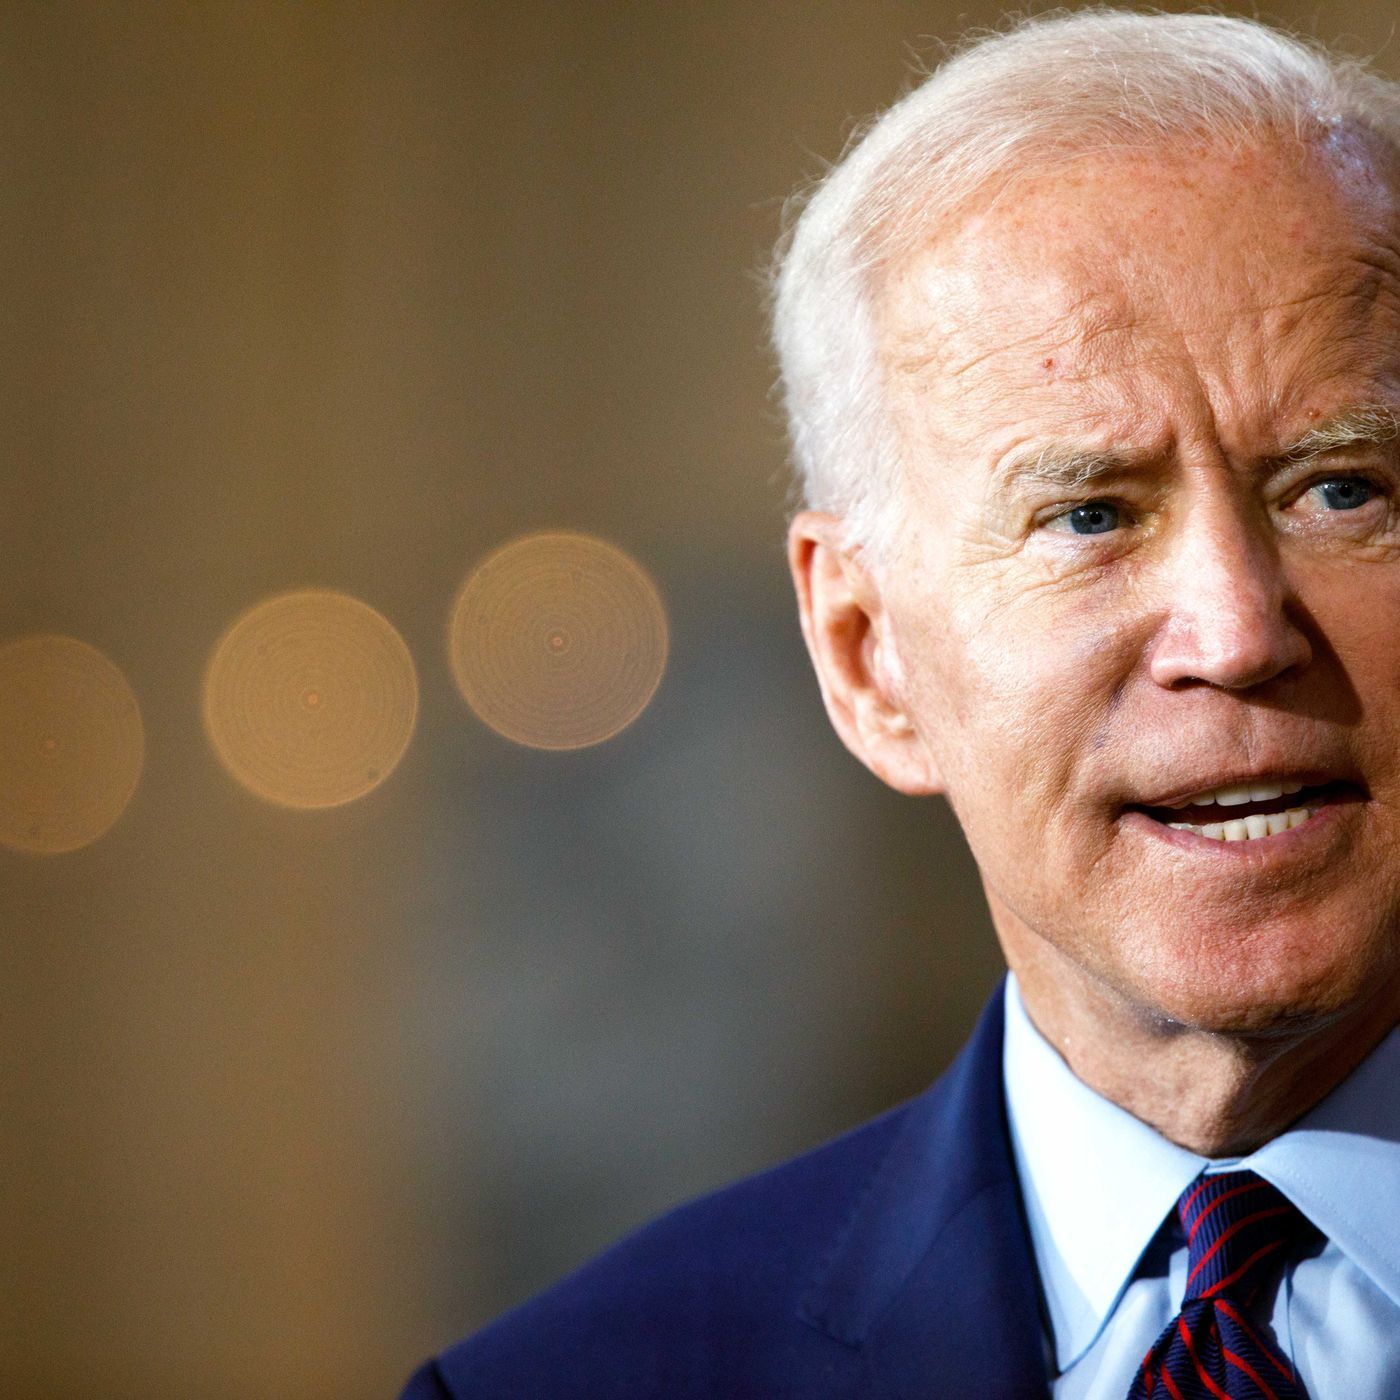 Who is Joe Biden? His 2020 presidential campaign and policy positions, explained